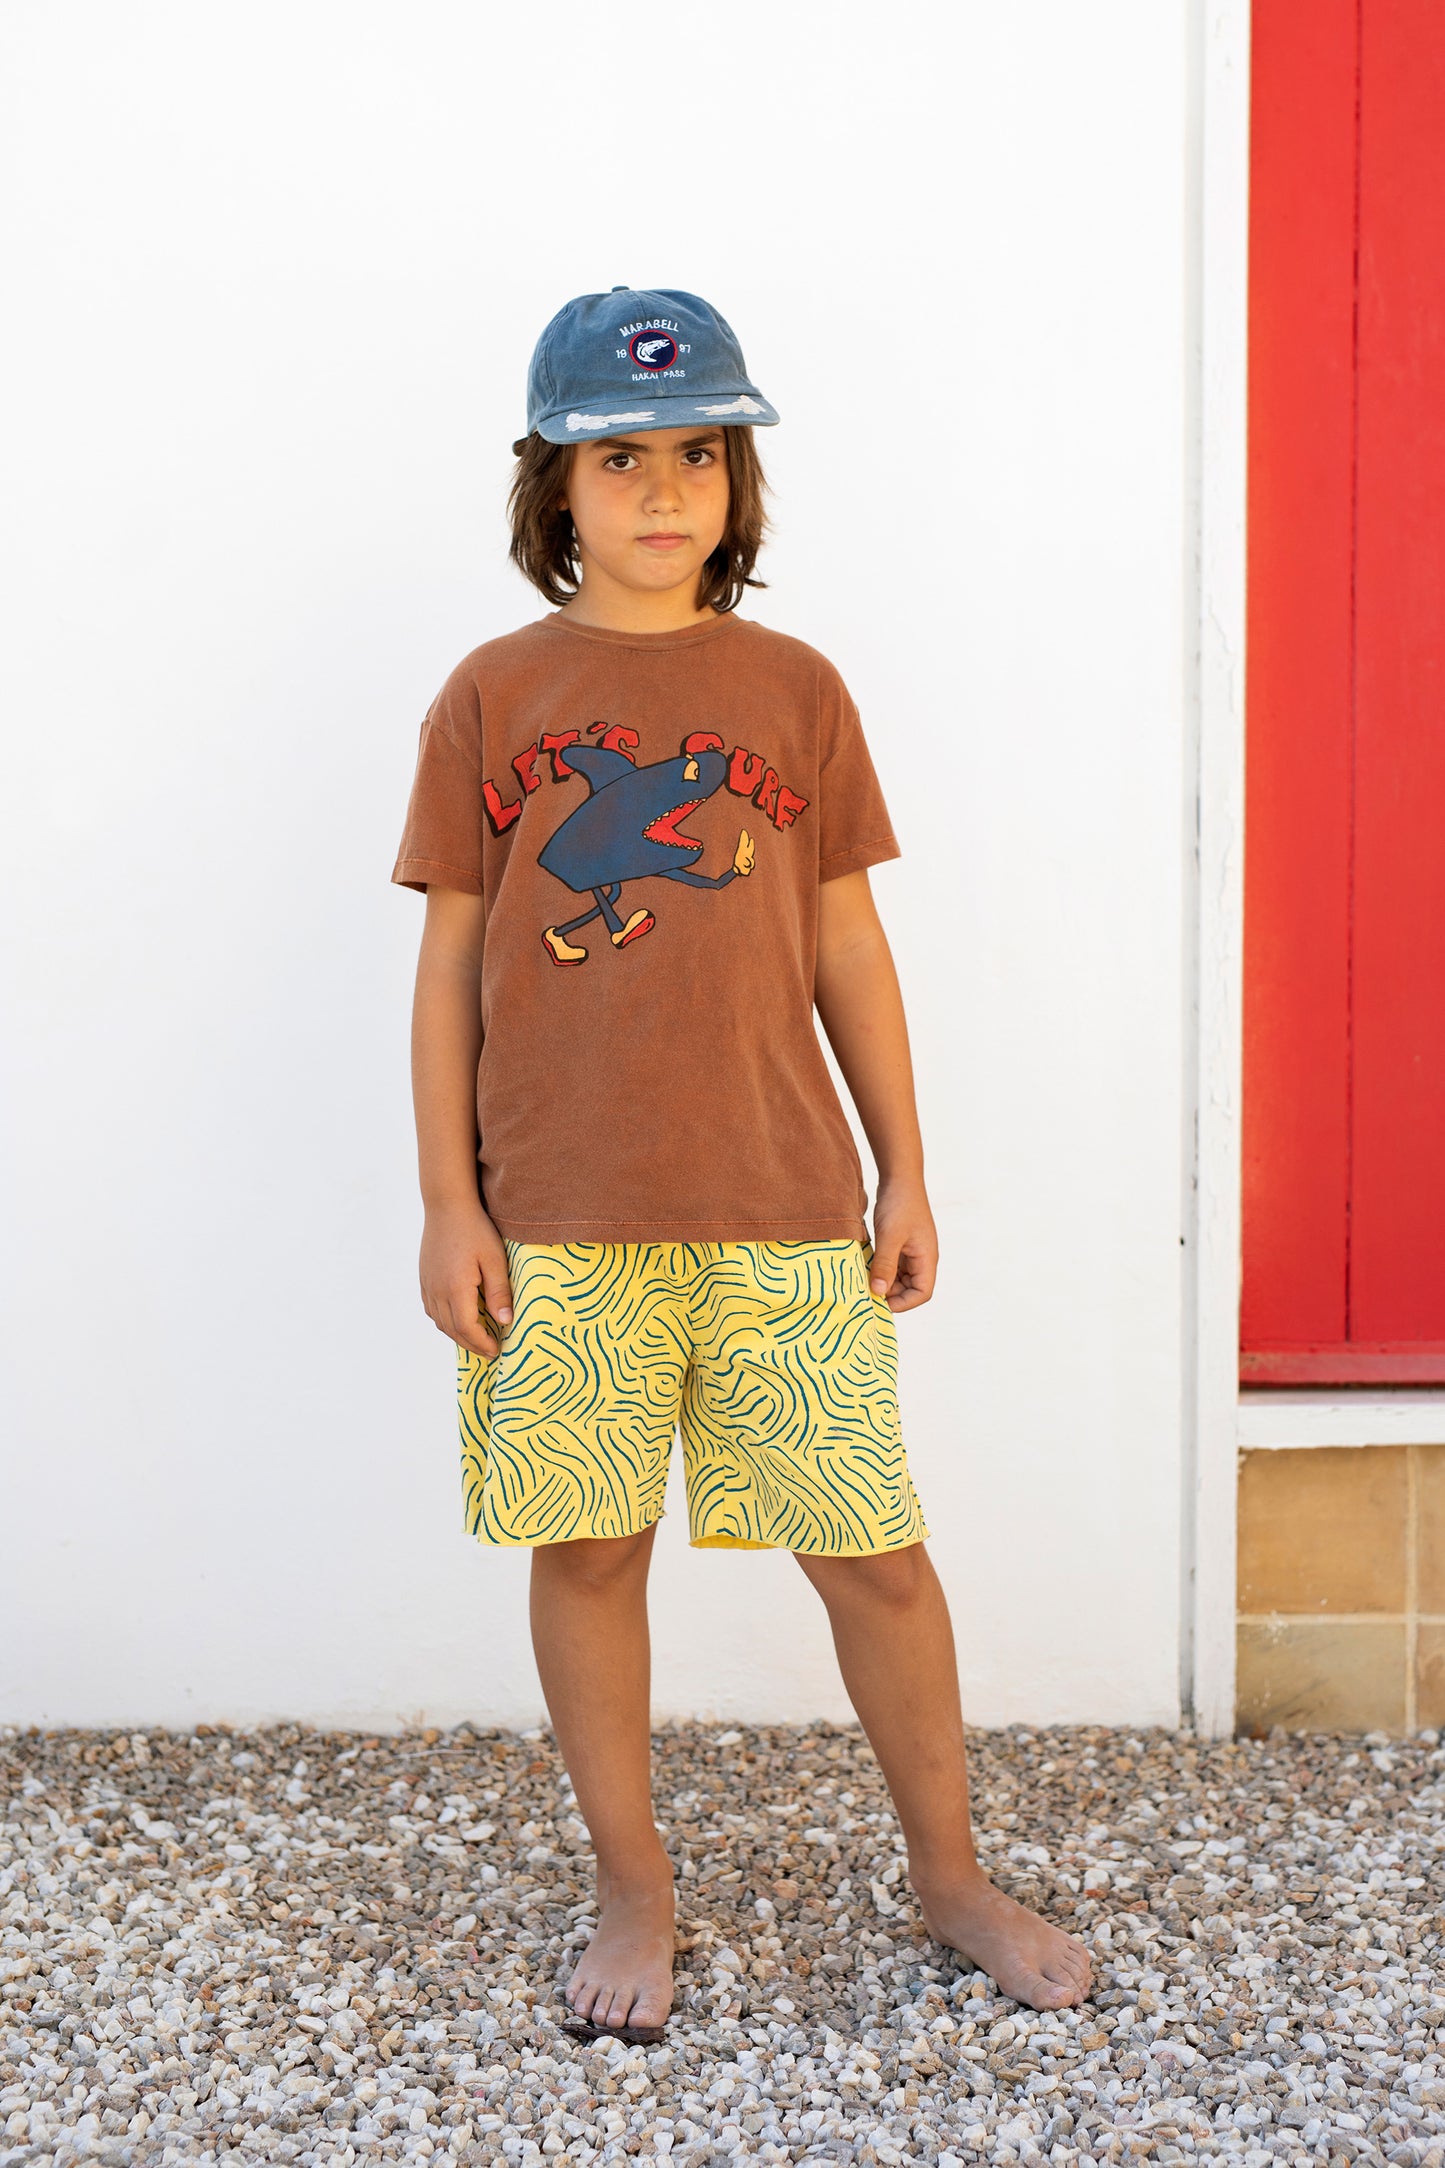 Waves Shorts Yellow 2y